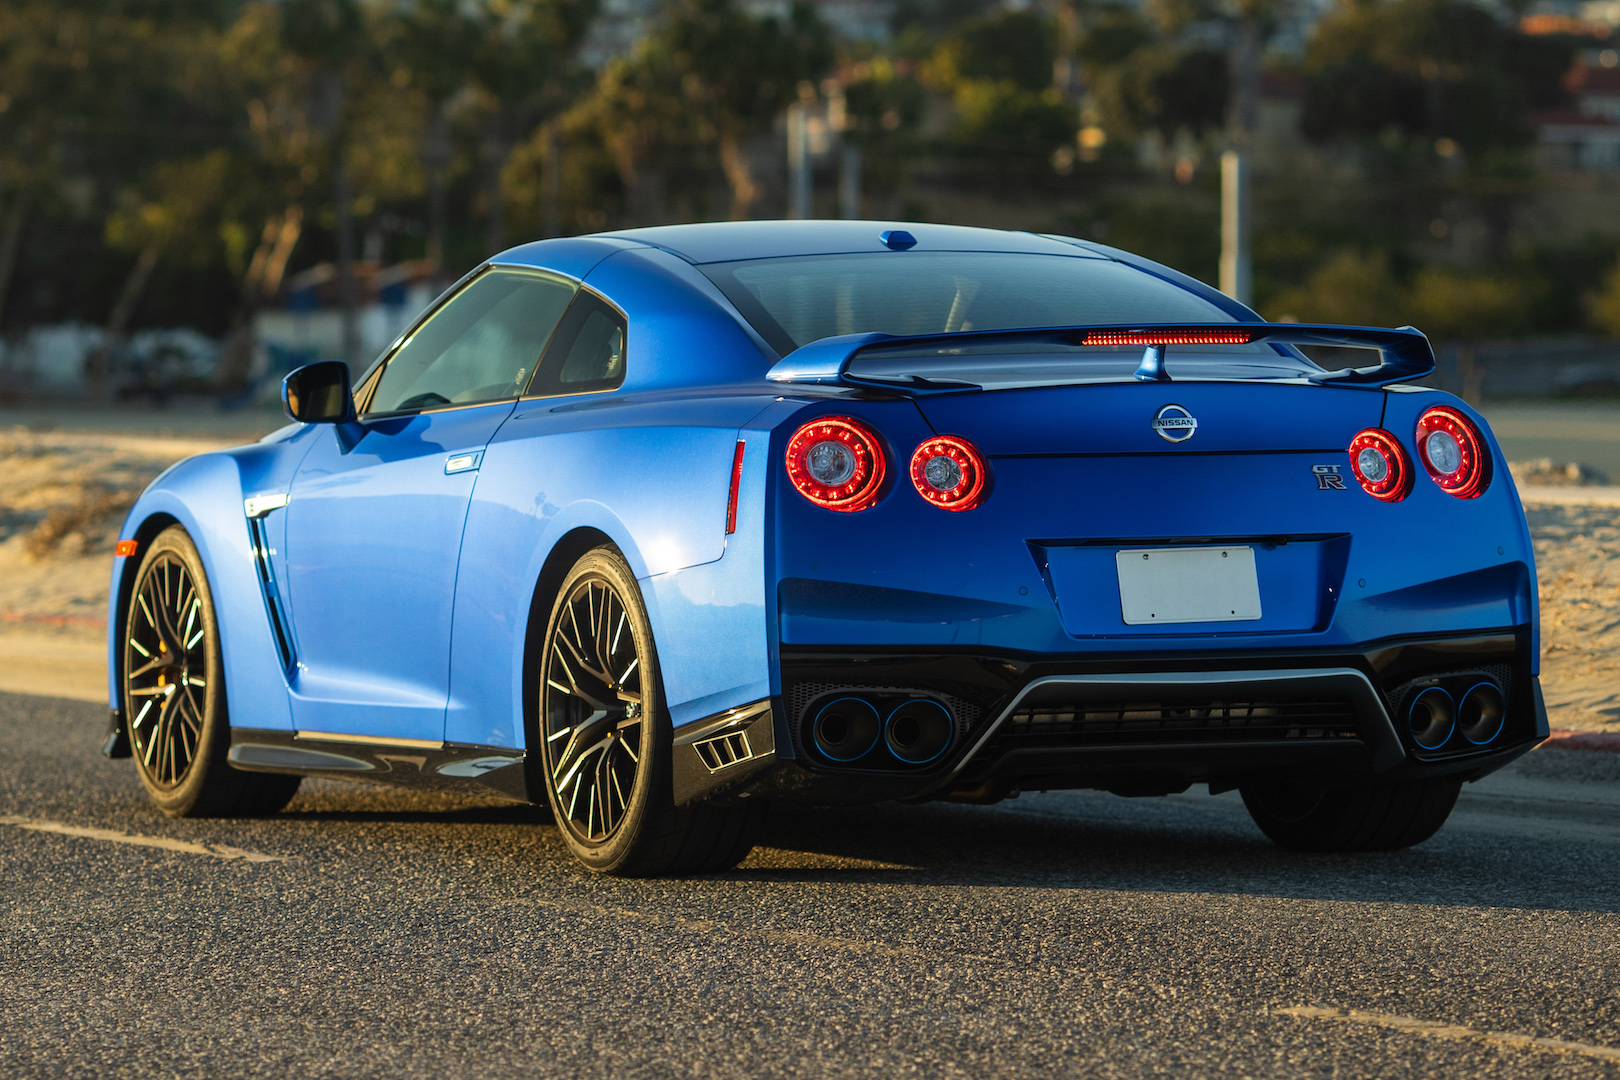 R36 Nissan GT-R to be “fastest super sports car in the world